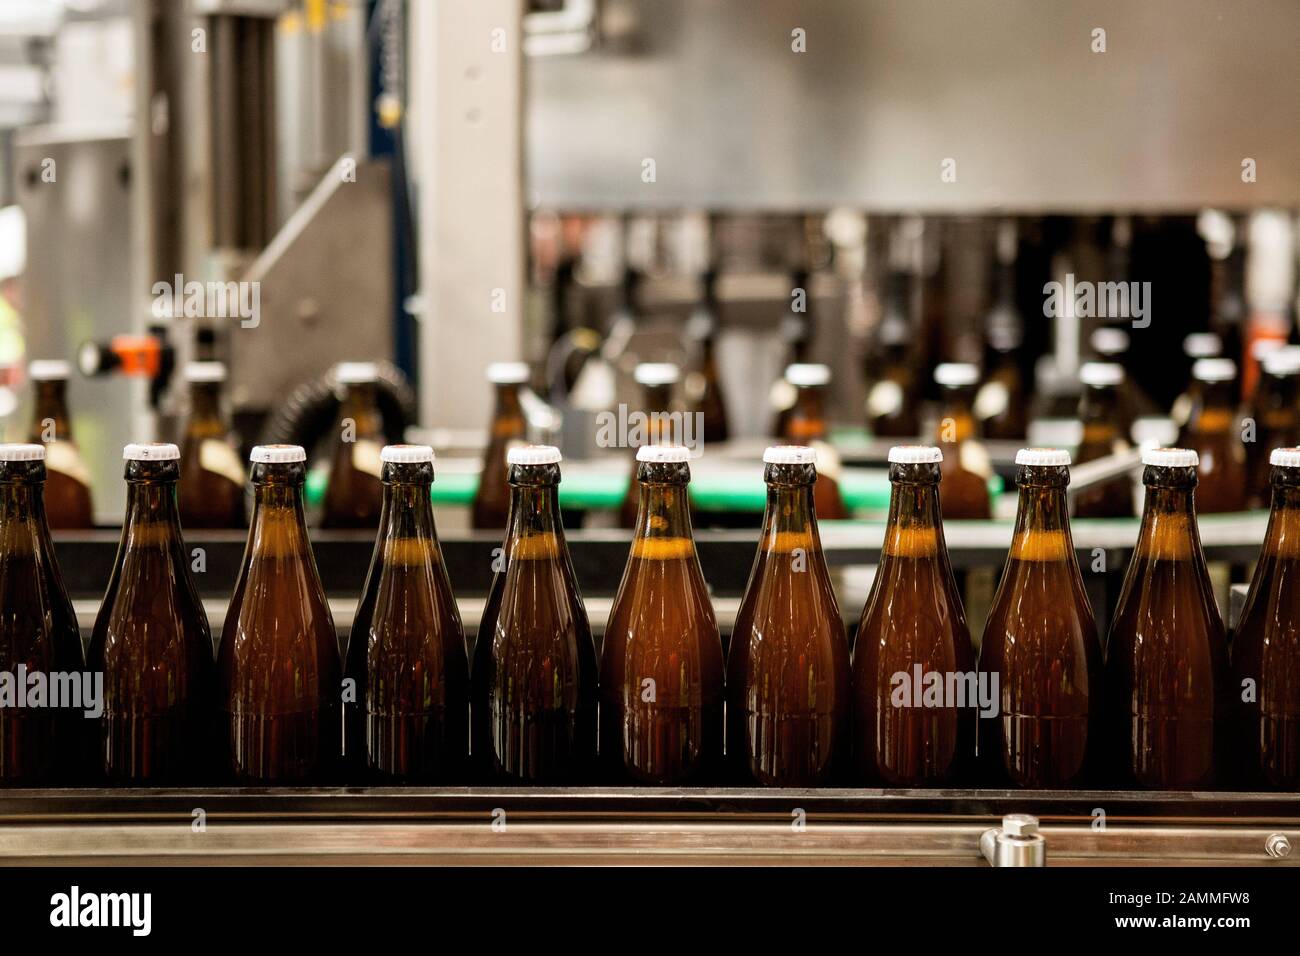 Paulaner ceremoniously commissions the first bottling line in the new brewery building in Langwied. The picture shows beer bottles on the assembly line in the bottling hall. [automated translation] Stock Photo